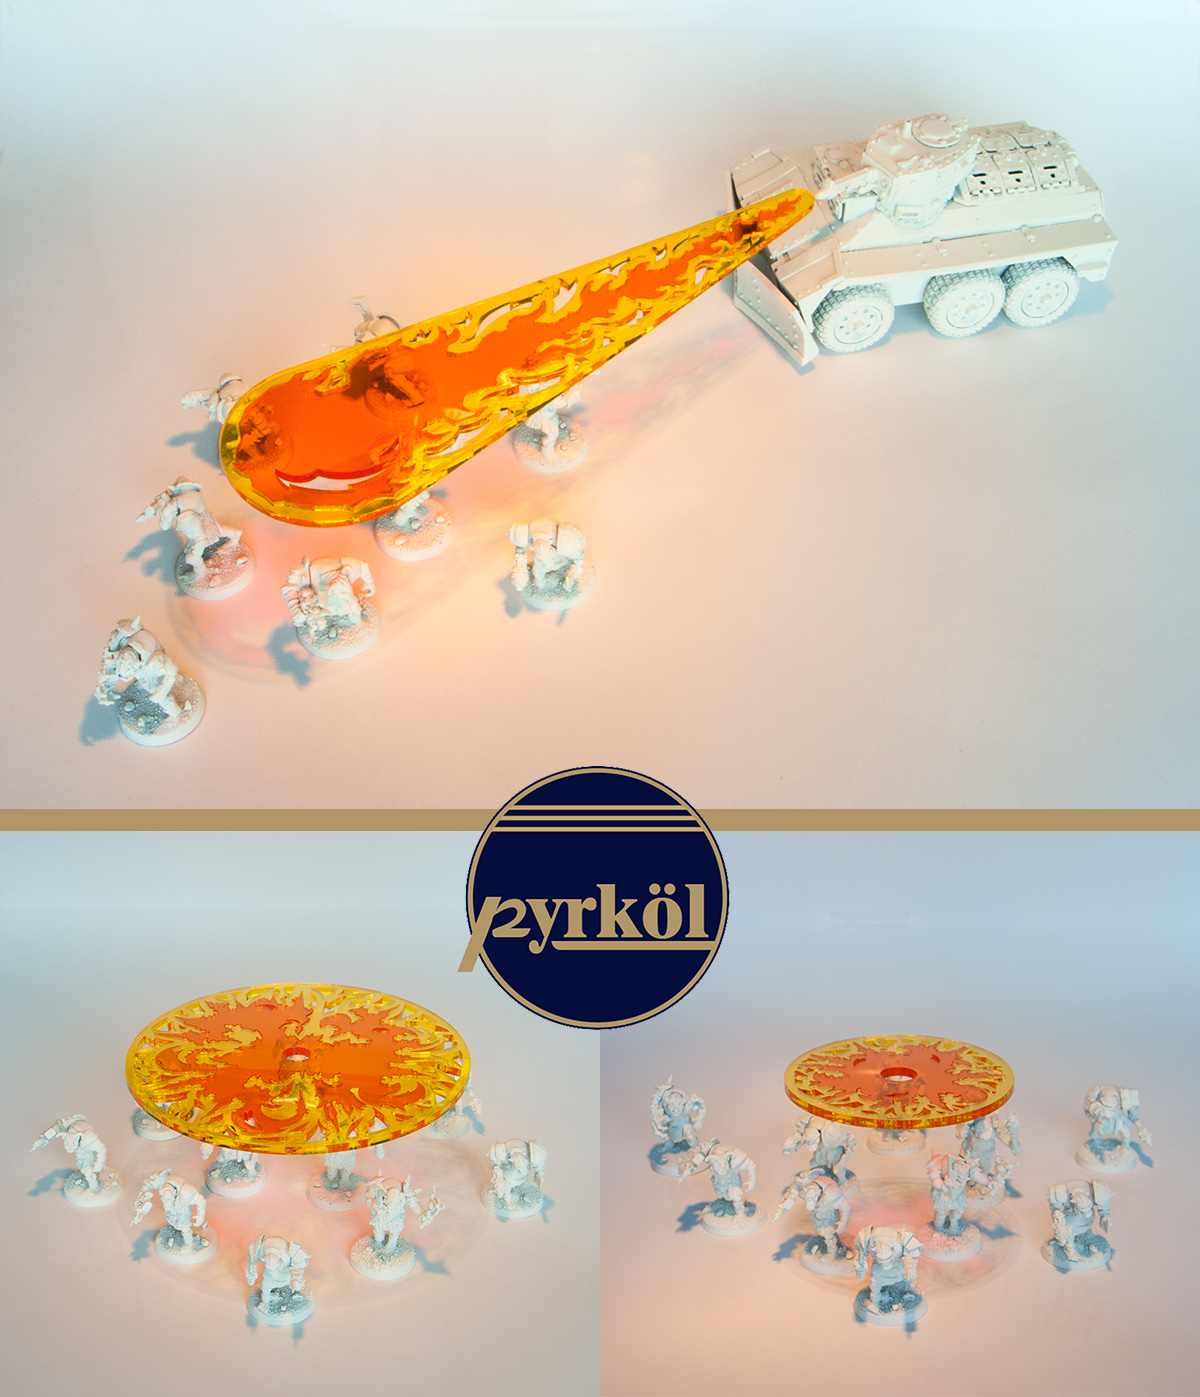 Pyrkol Launches new 3" Inch, 5" Inch and Flame Template